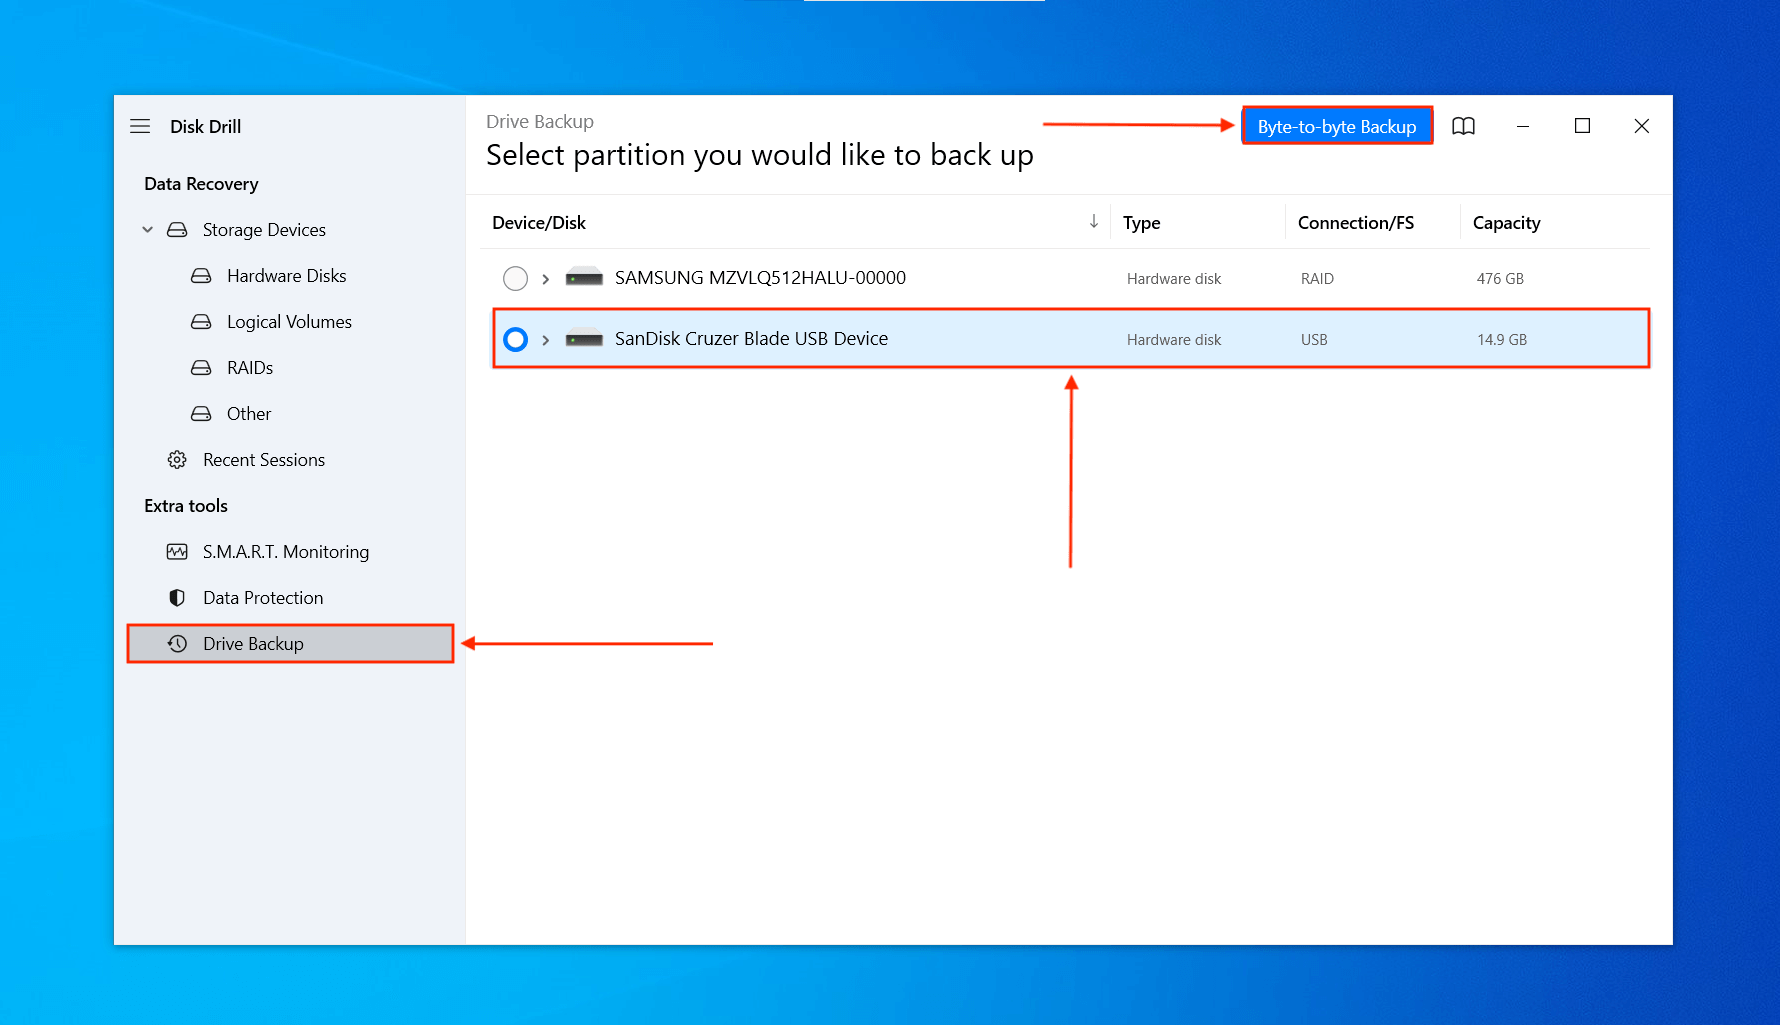 DIsk Drill Byte-to-byte backup window